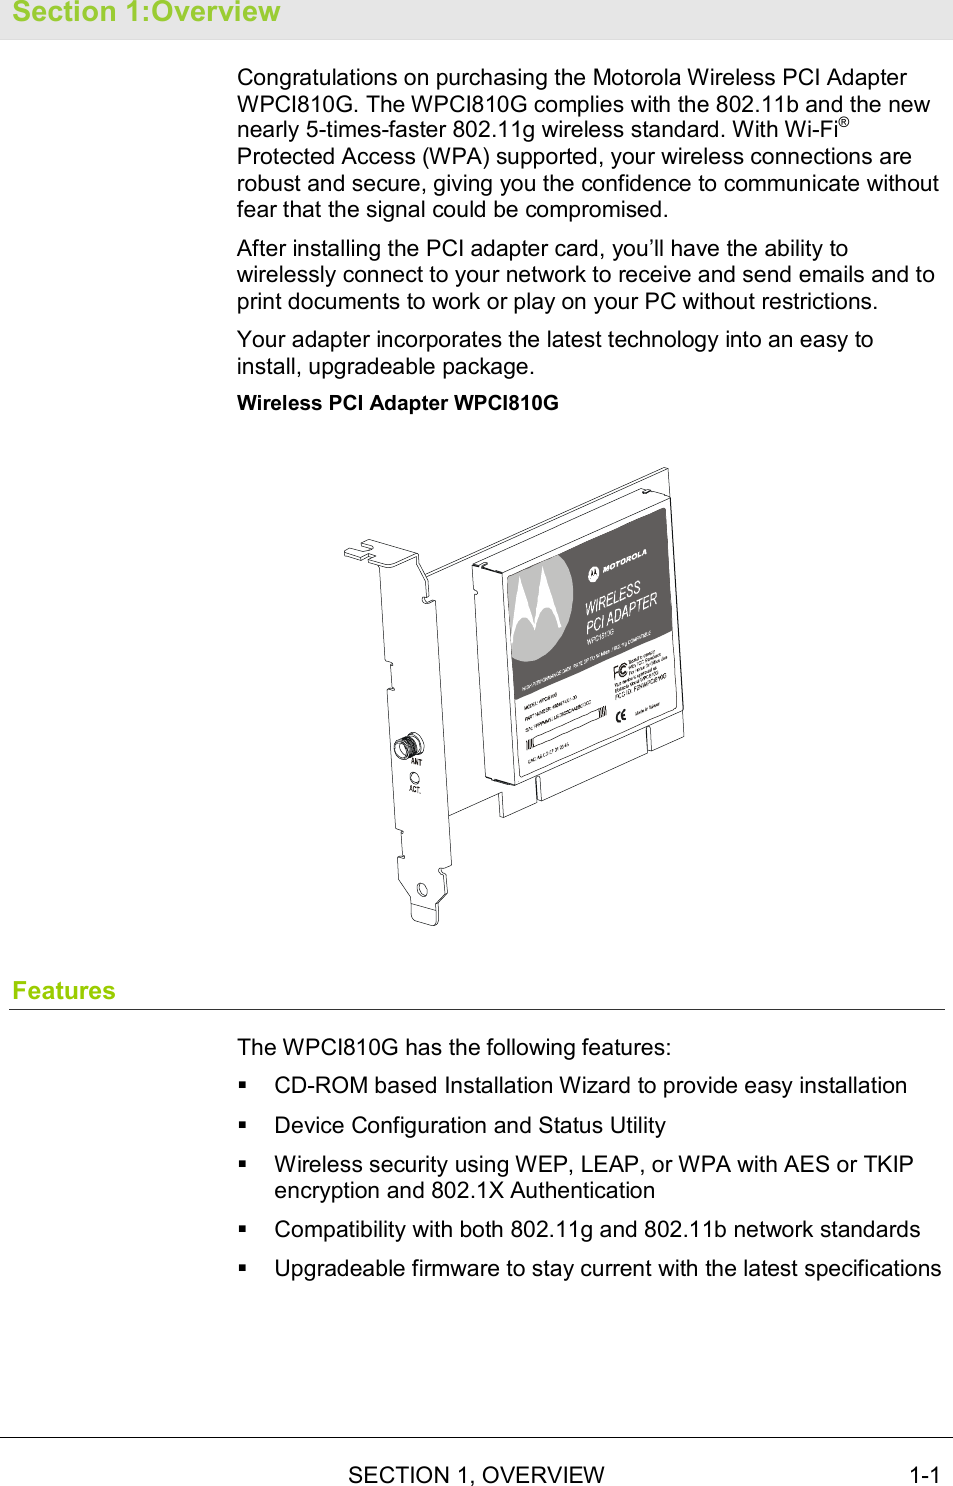   SECTION 1, OVERVIEW  1-1 Section 1:Overview Congratulations on purchasing the Motorola Wireless PCI Adapter WPCI810G. The WPCI810G complies with the 802.11b and the new nearly 5-times-faster 802.11g wireless standard. With Wi-Fi® Protected Access (WPA) supported, your wireless connections are robust and secure, giving you the confidence to communicate without fear that the signal could be compromised. After installing the PCI adapter card, you’ll have the ability to wirelessly connect to your network to receive and send emails and to print documents to work or play on your PC without restrictions. Your adapter incorporates the latest technology into an easy to install, upgradeable package. Wireless PCI Adapter WPCI810G  Features The WPCI810G has the following features: !  CD-ROM based Installation Wizard to provide easy installation !  Device Configuration and Status Utility !  Wireless security using WEP, LEAP, or WPA with AES or TKIP encryption and 802.1X Authentication !  Compatibility with both 802.11g and 802.11b network standards !  Upgradeable firmware to stay current with the latest specifications 